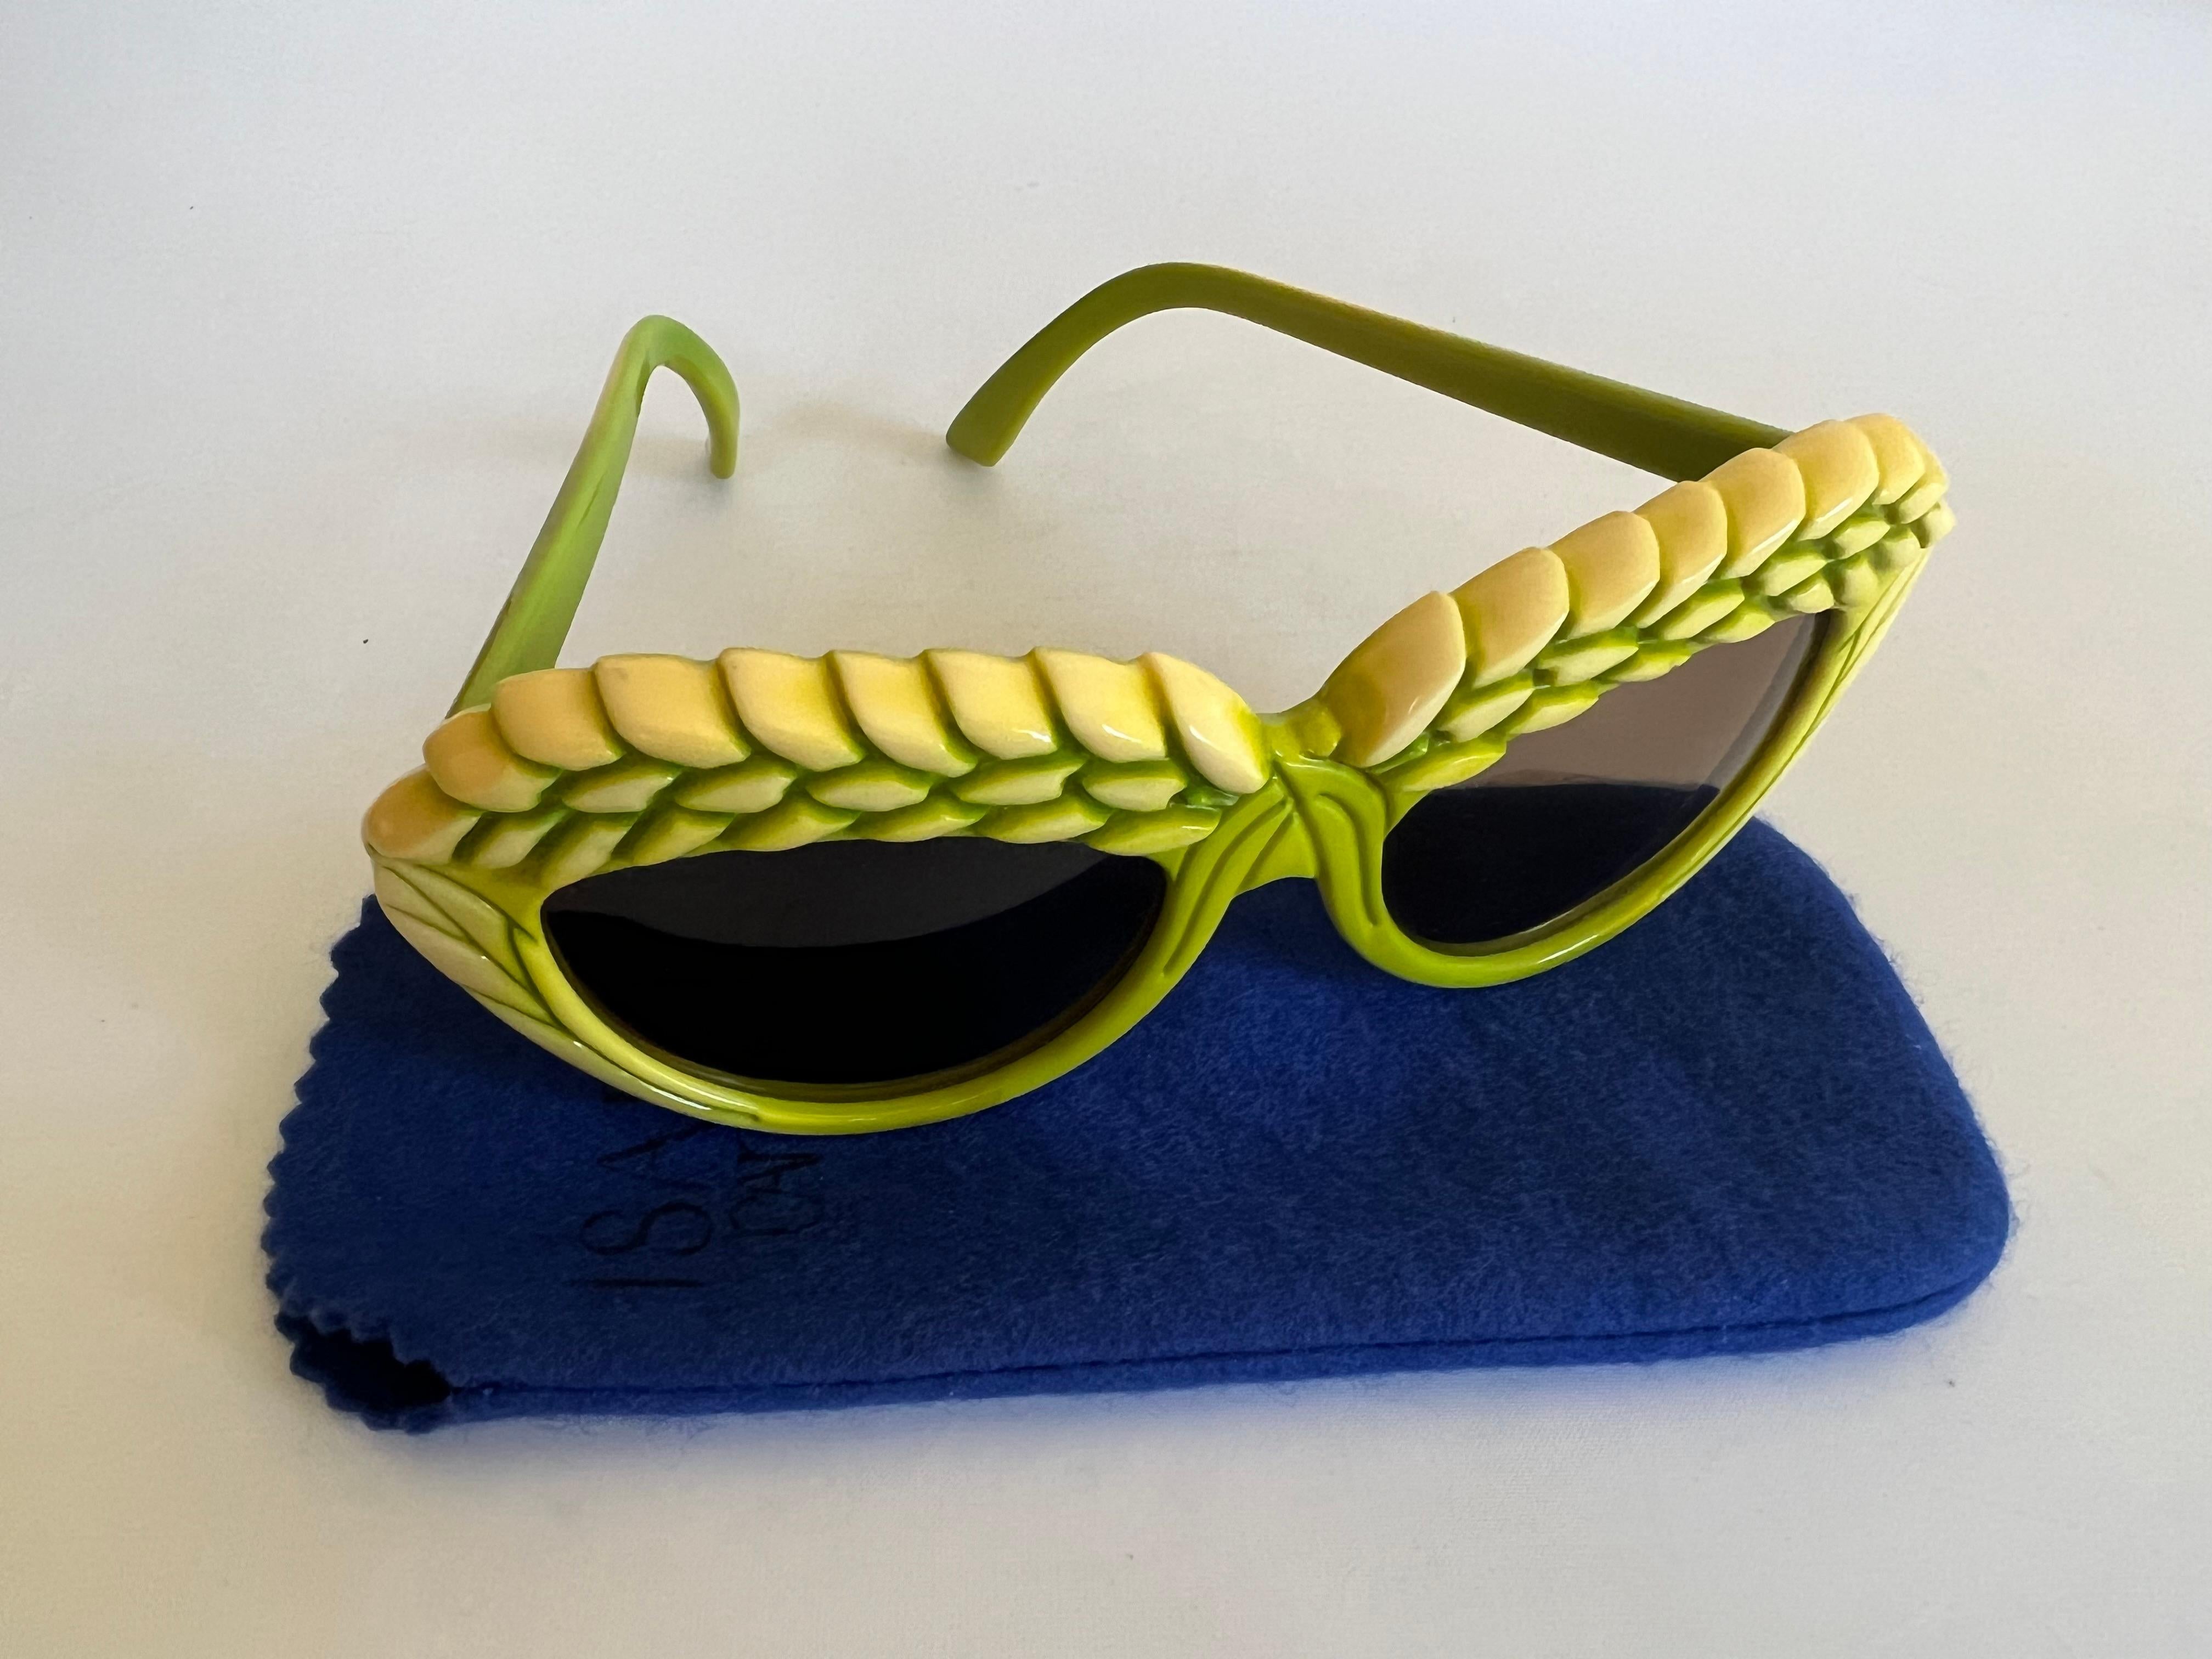 Extremely rare, bright pair of green Isabel Canovas sunglasses with brown tinted lenses and a detailed galalith frame -  made in France. 